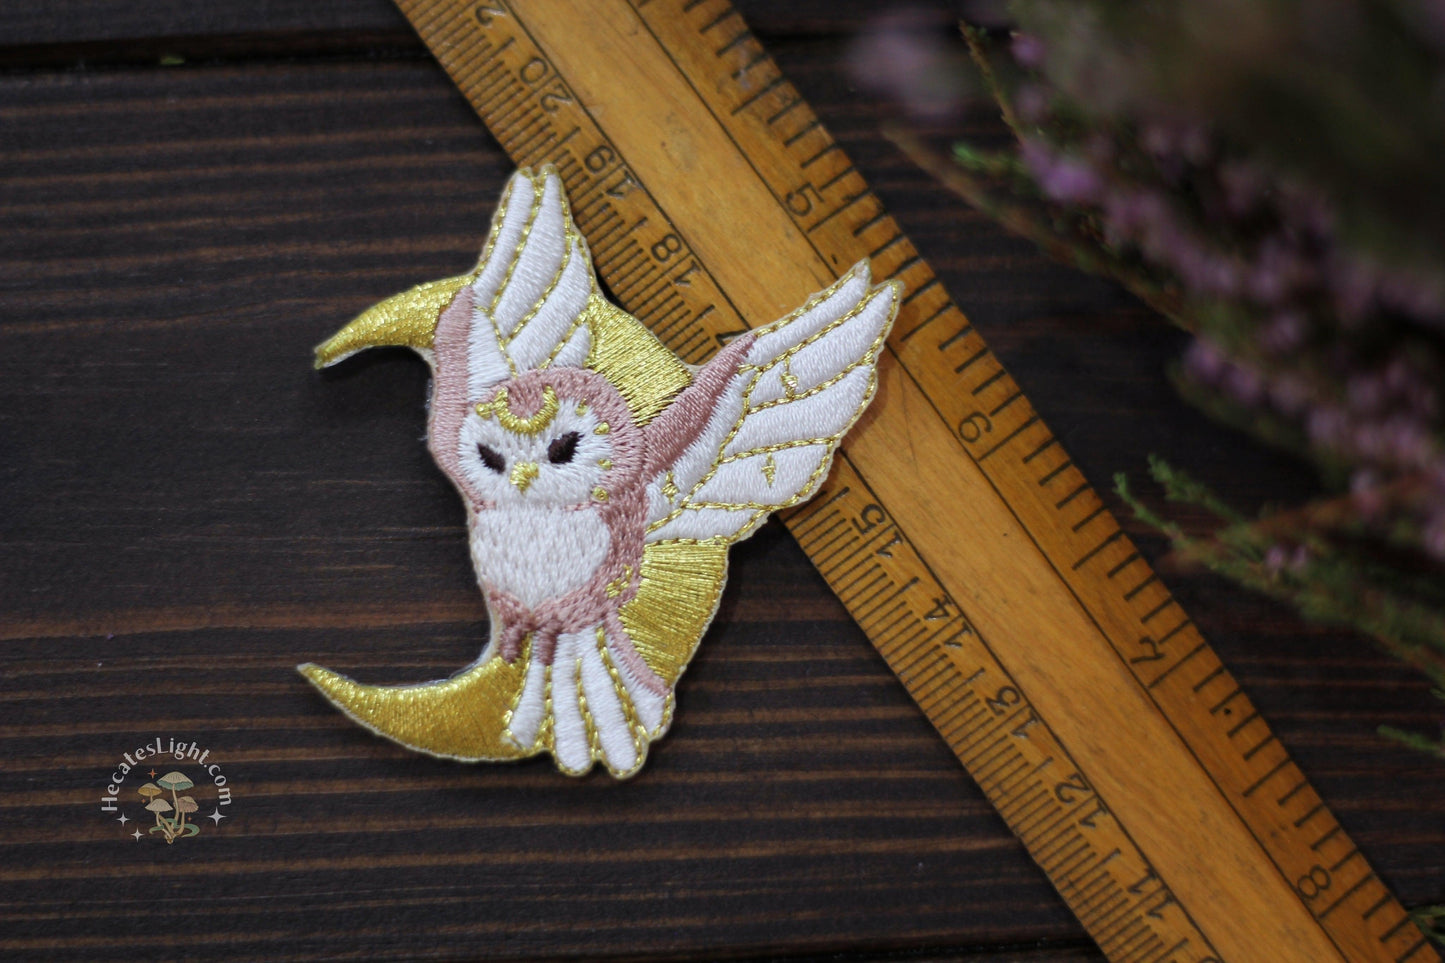 Night Owl Patch MALICIEUSE calgary, canada, canada oracle, crescent moon, decorative, gold, iron, iron-on, magic, owl, pink, stationary gift, teen teenage, teenage witch, witchy gift metaphysical occult supplies witchy hecateslight.com witchcraft cottagecore witch gifts